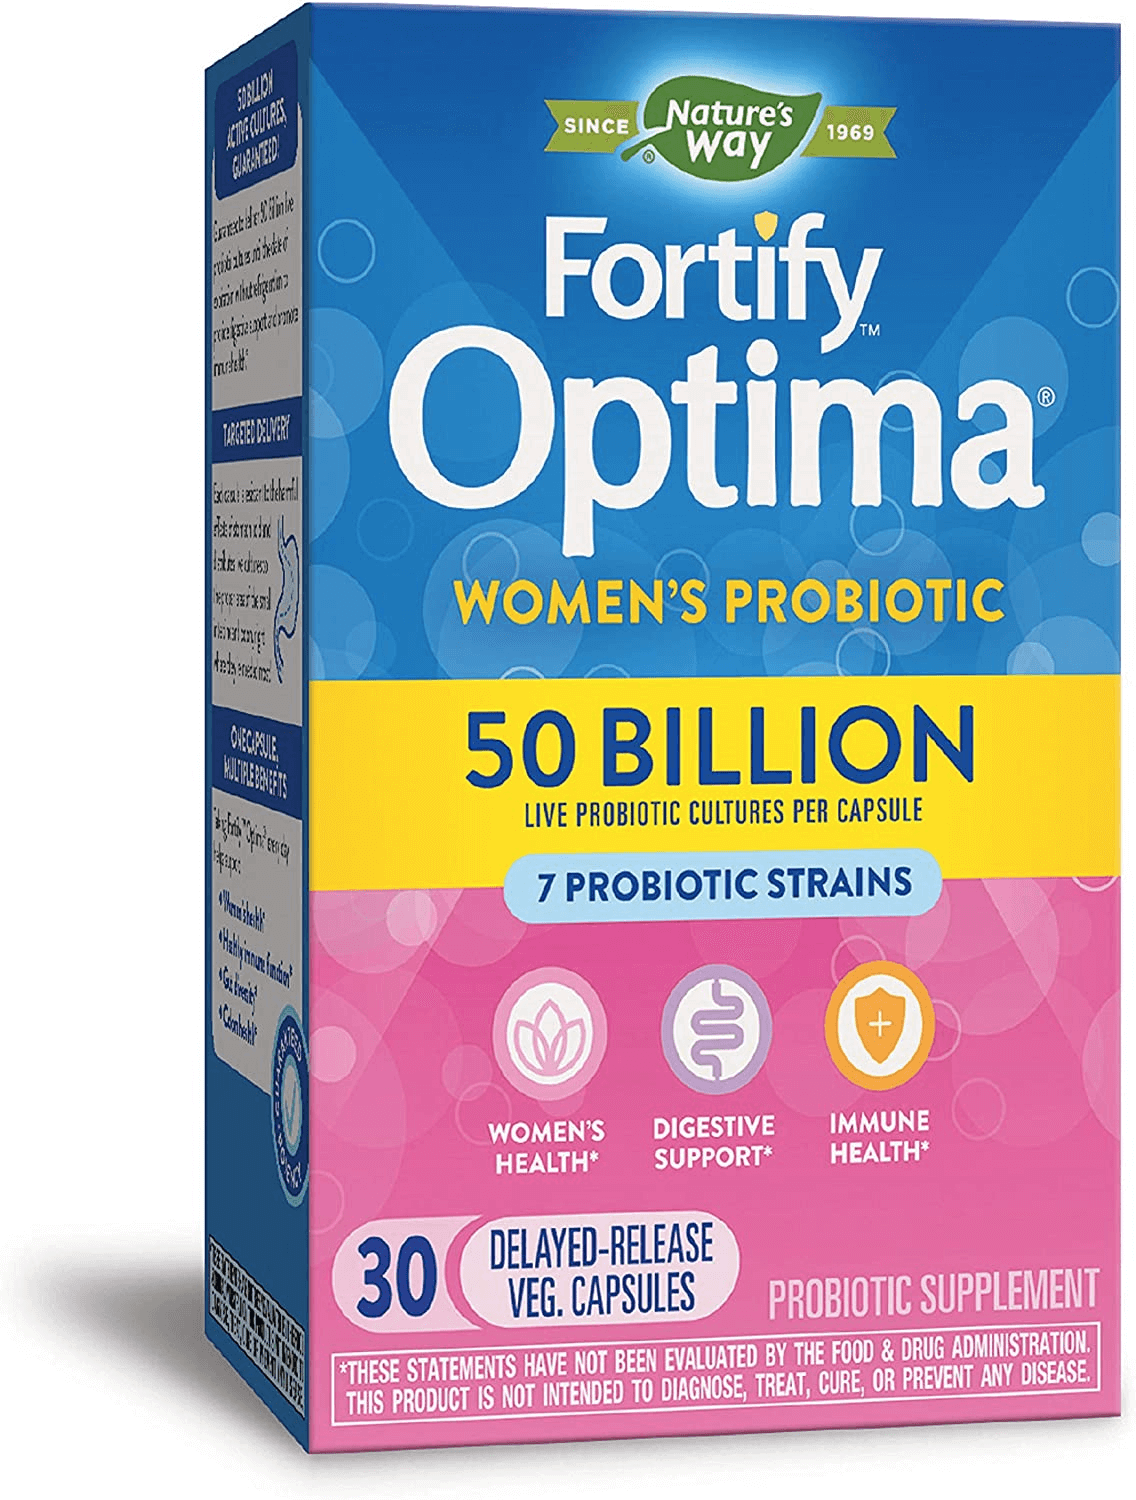 nature's way fortify optima women's probiotic